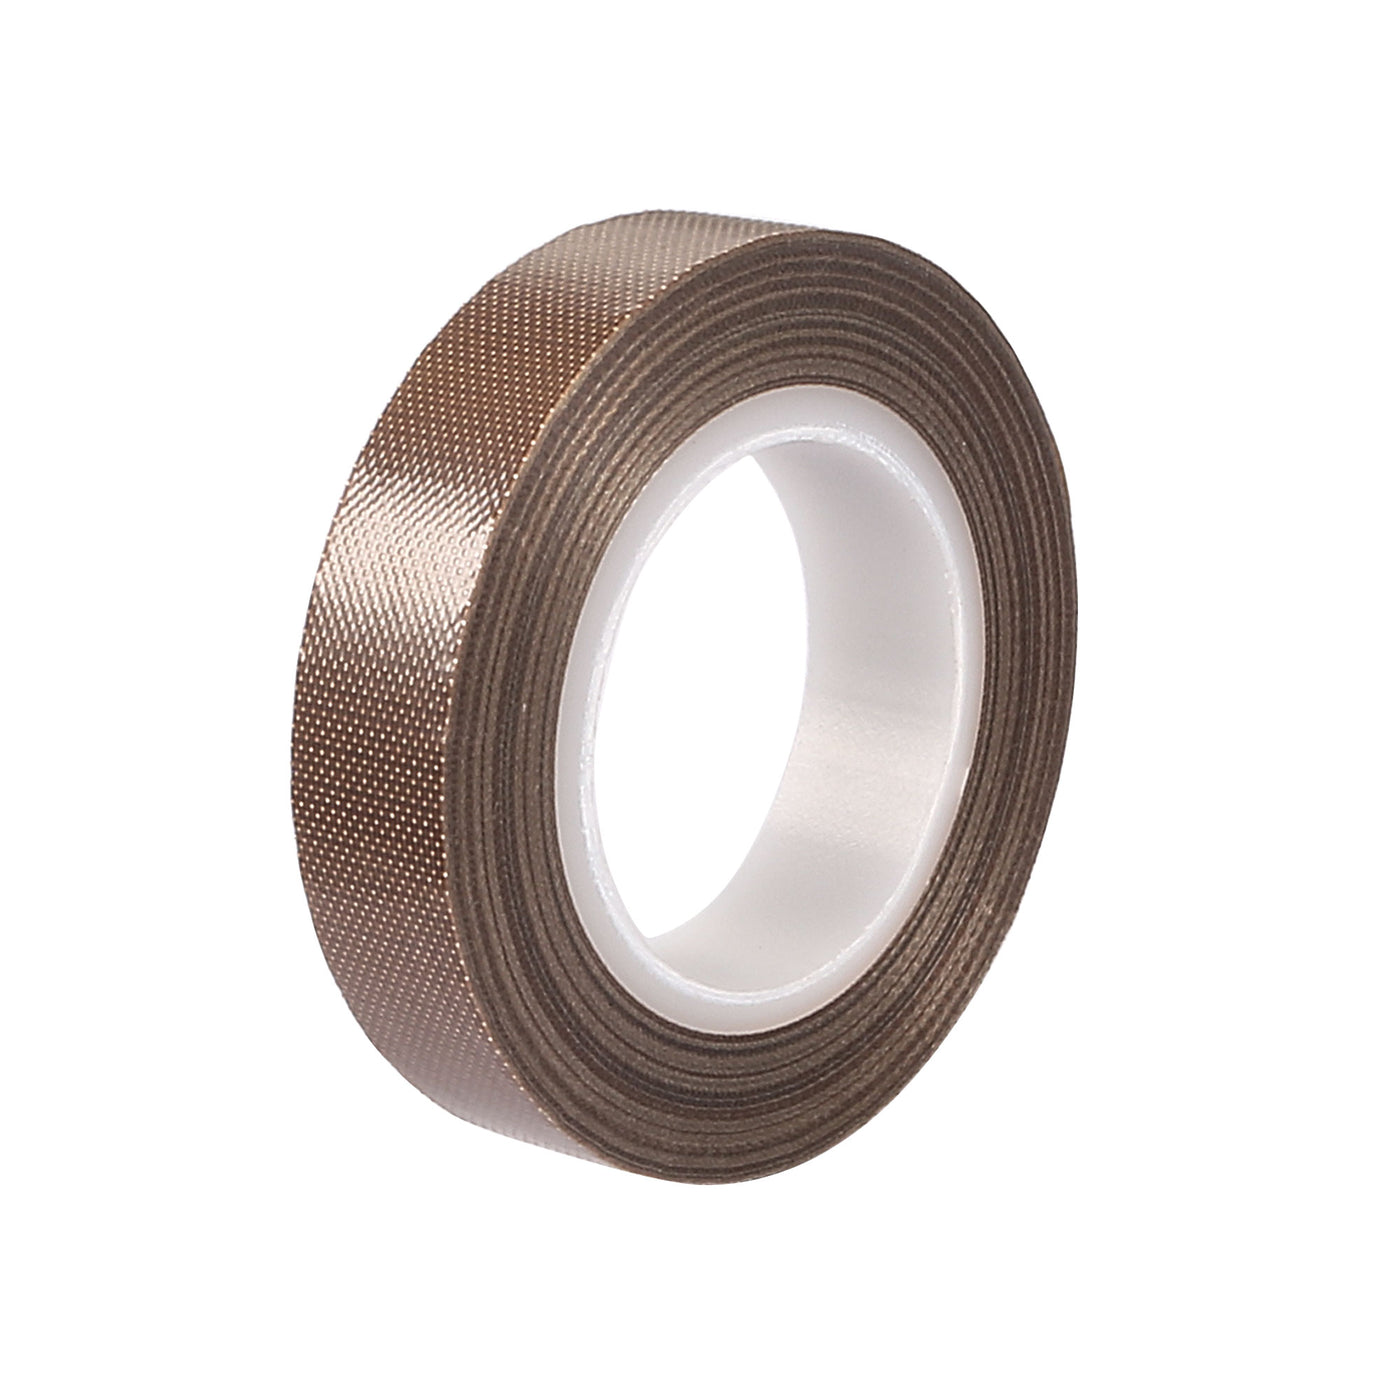 uxcell Uxcell 10mm PTFE Tape for Vacuum,Hand and Impulse Sealers High Temperature 10m/32.8ft